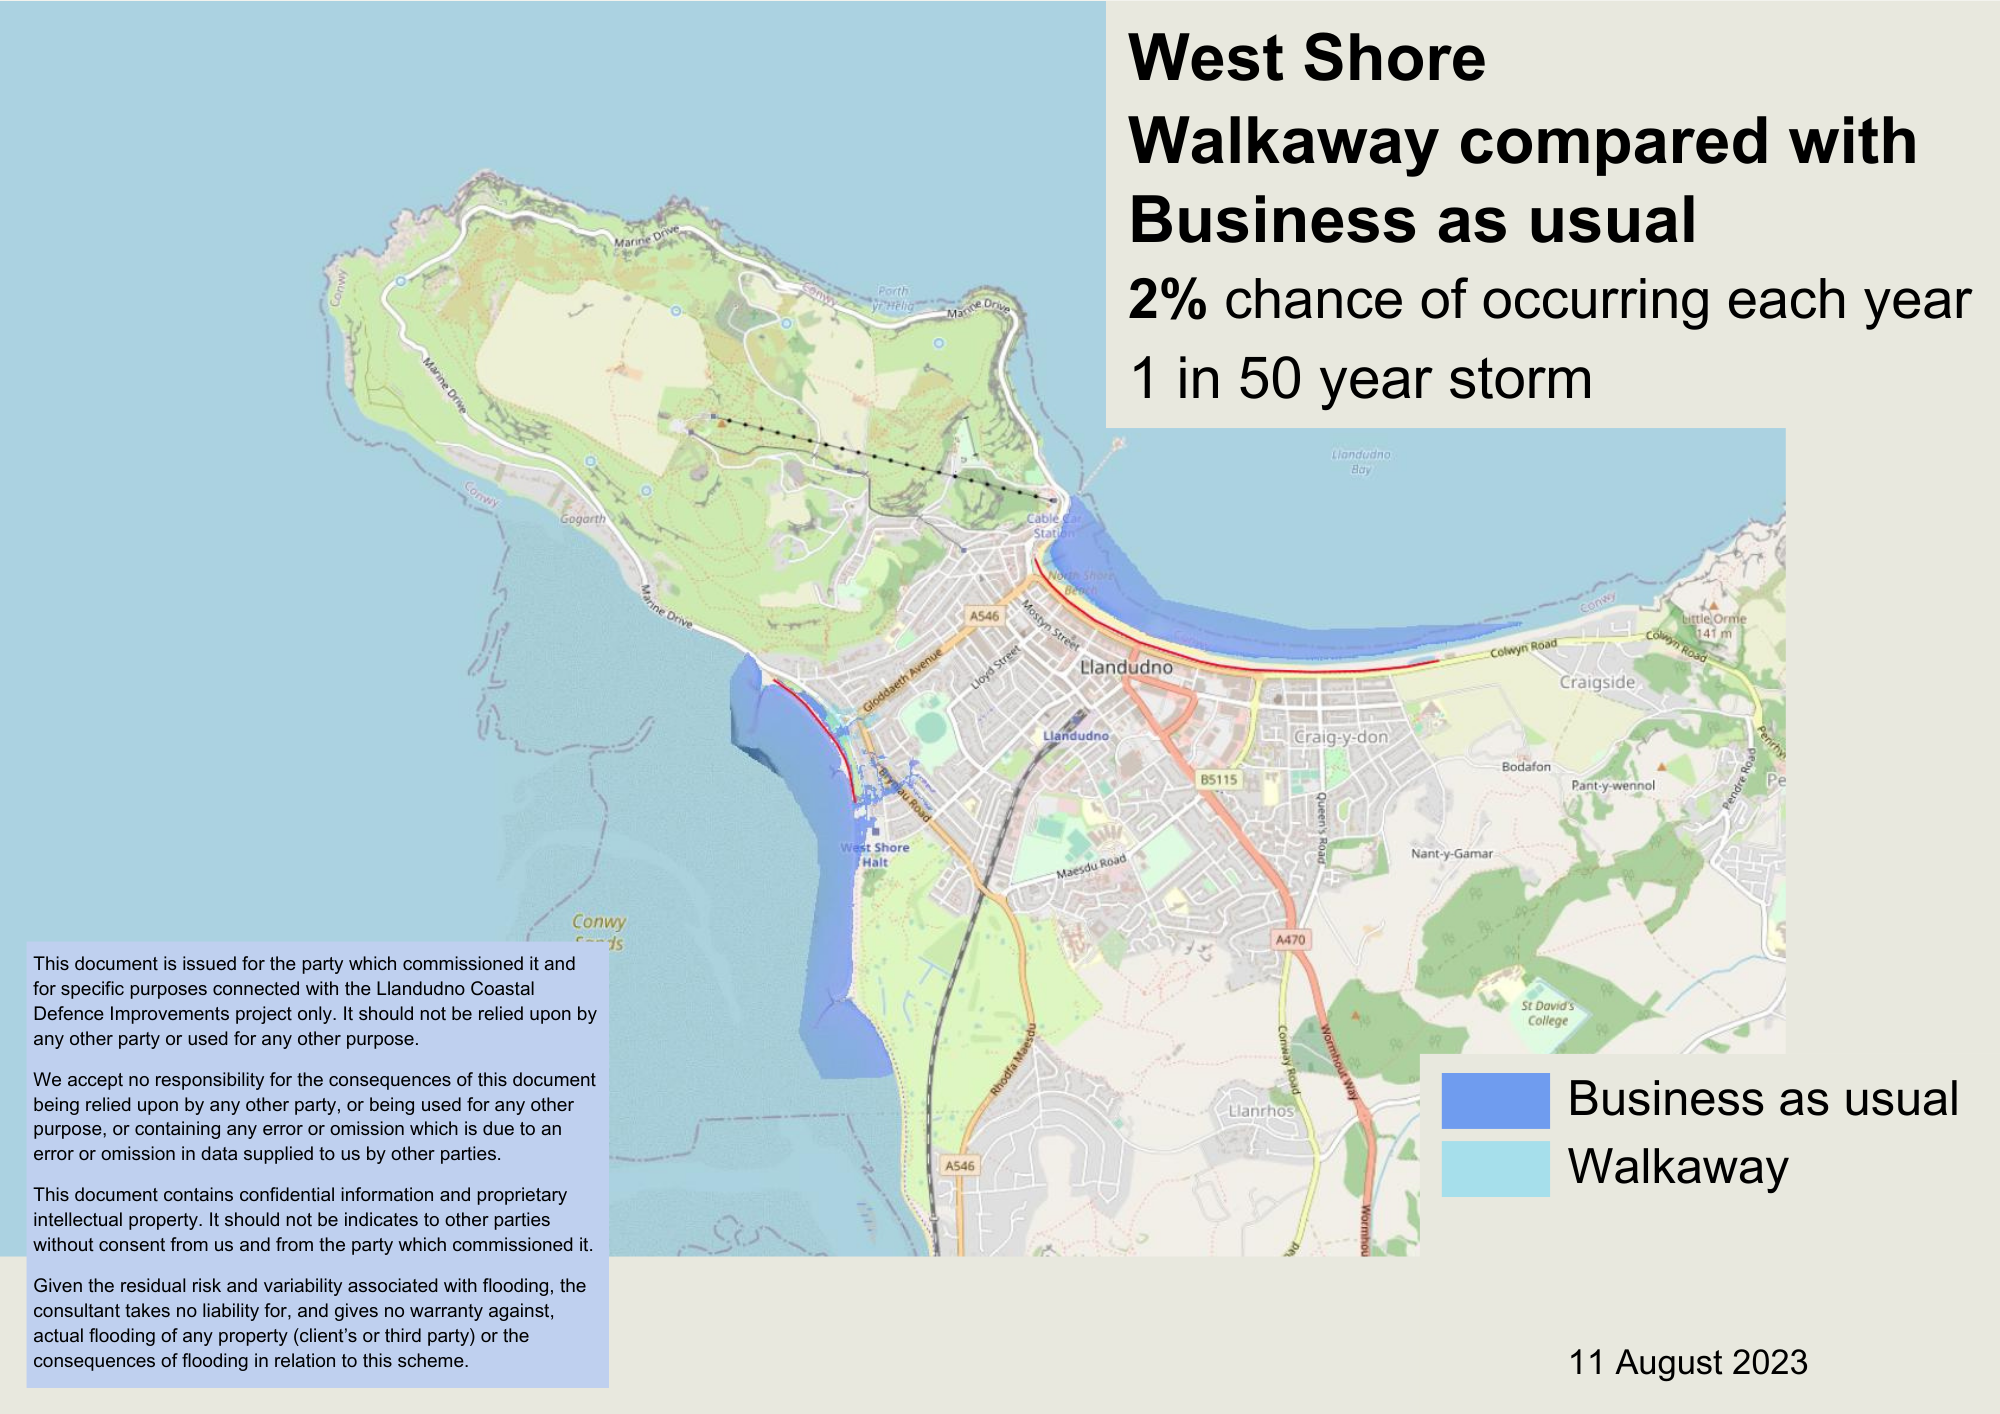 West Shore - Walkaway compared with business as usual in the 2% chance of flooding each year (1 in 50 years) scenario